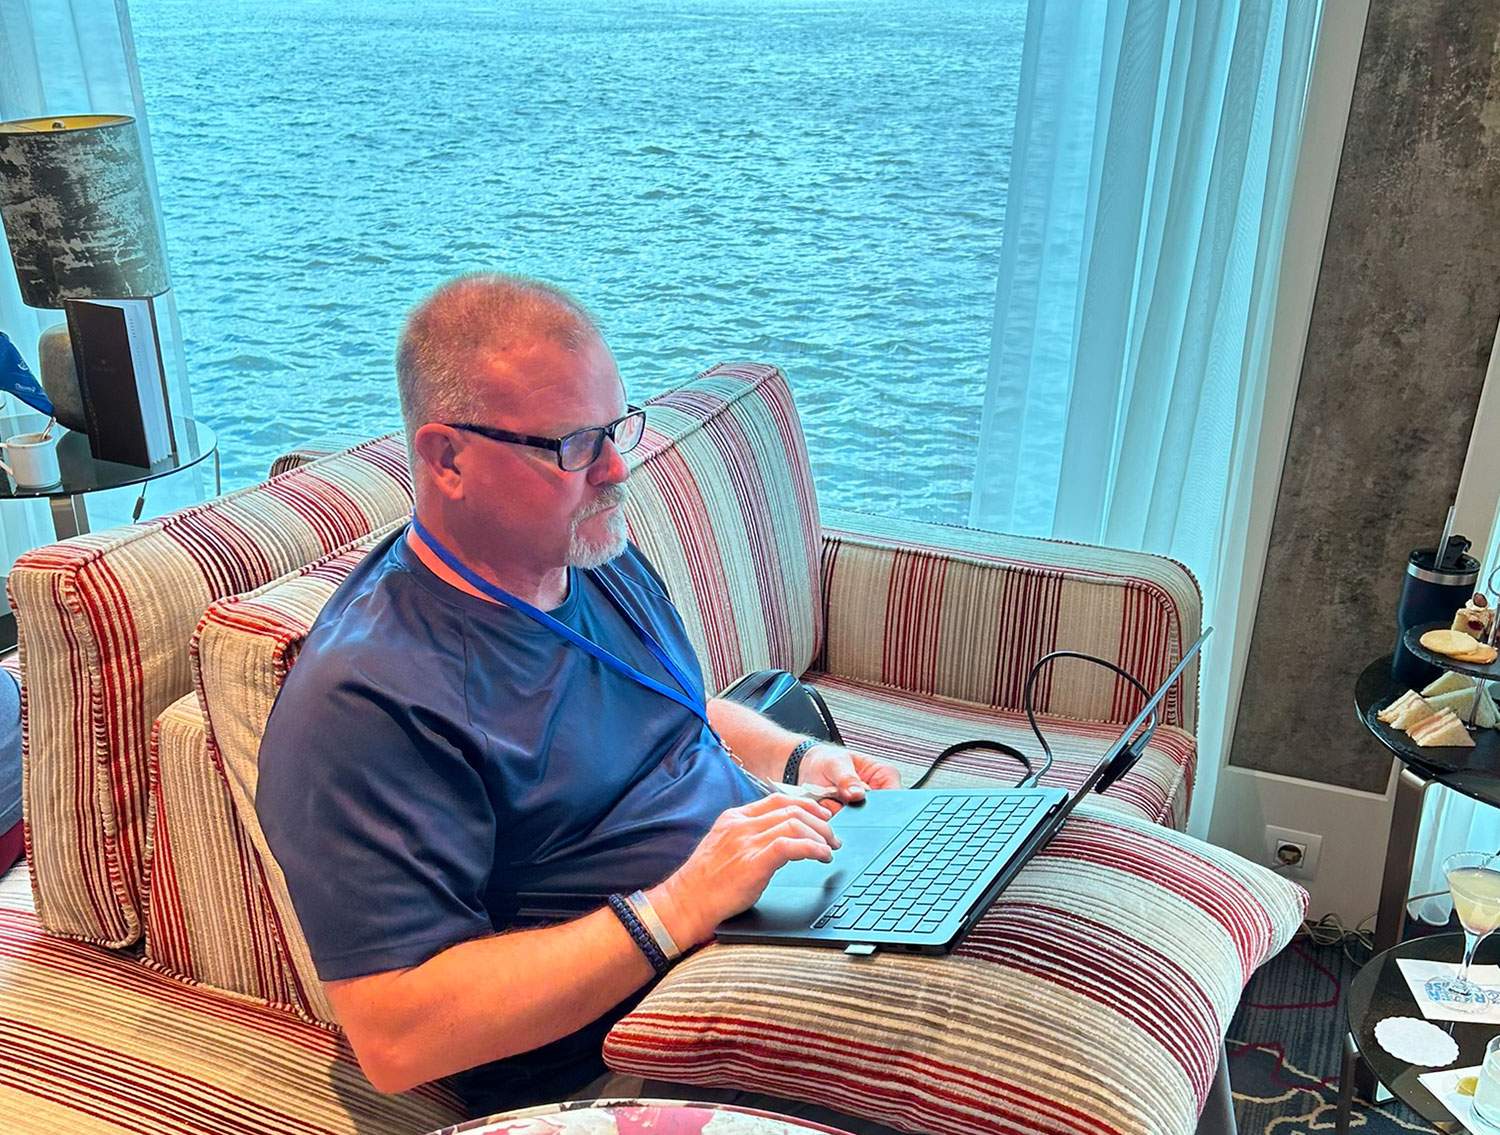 man on couch with laptop on a cruise ship